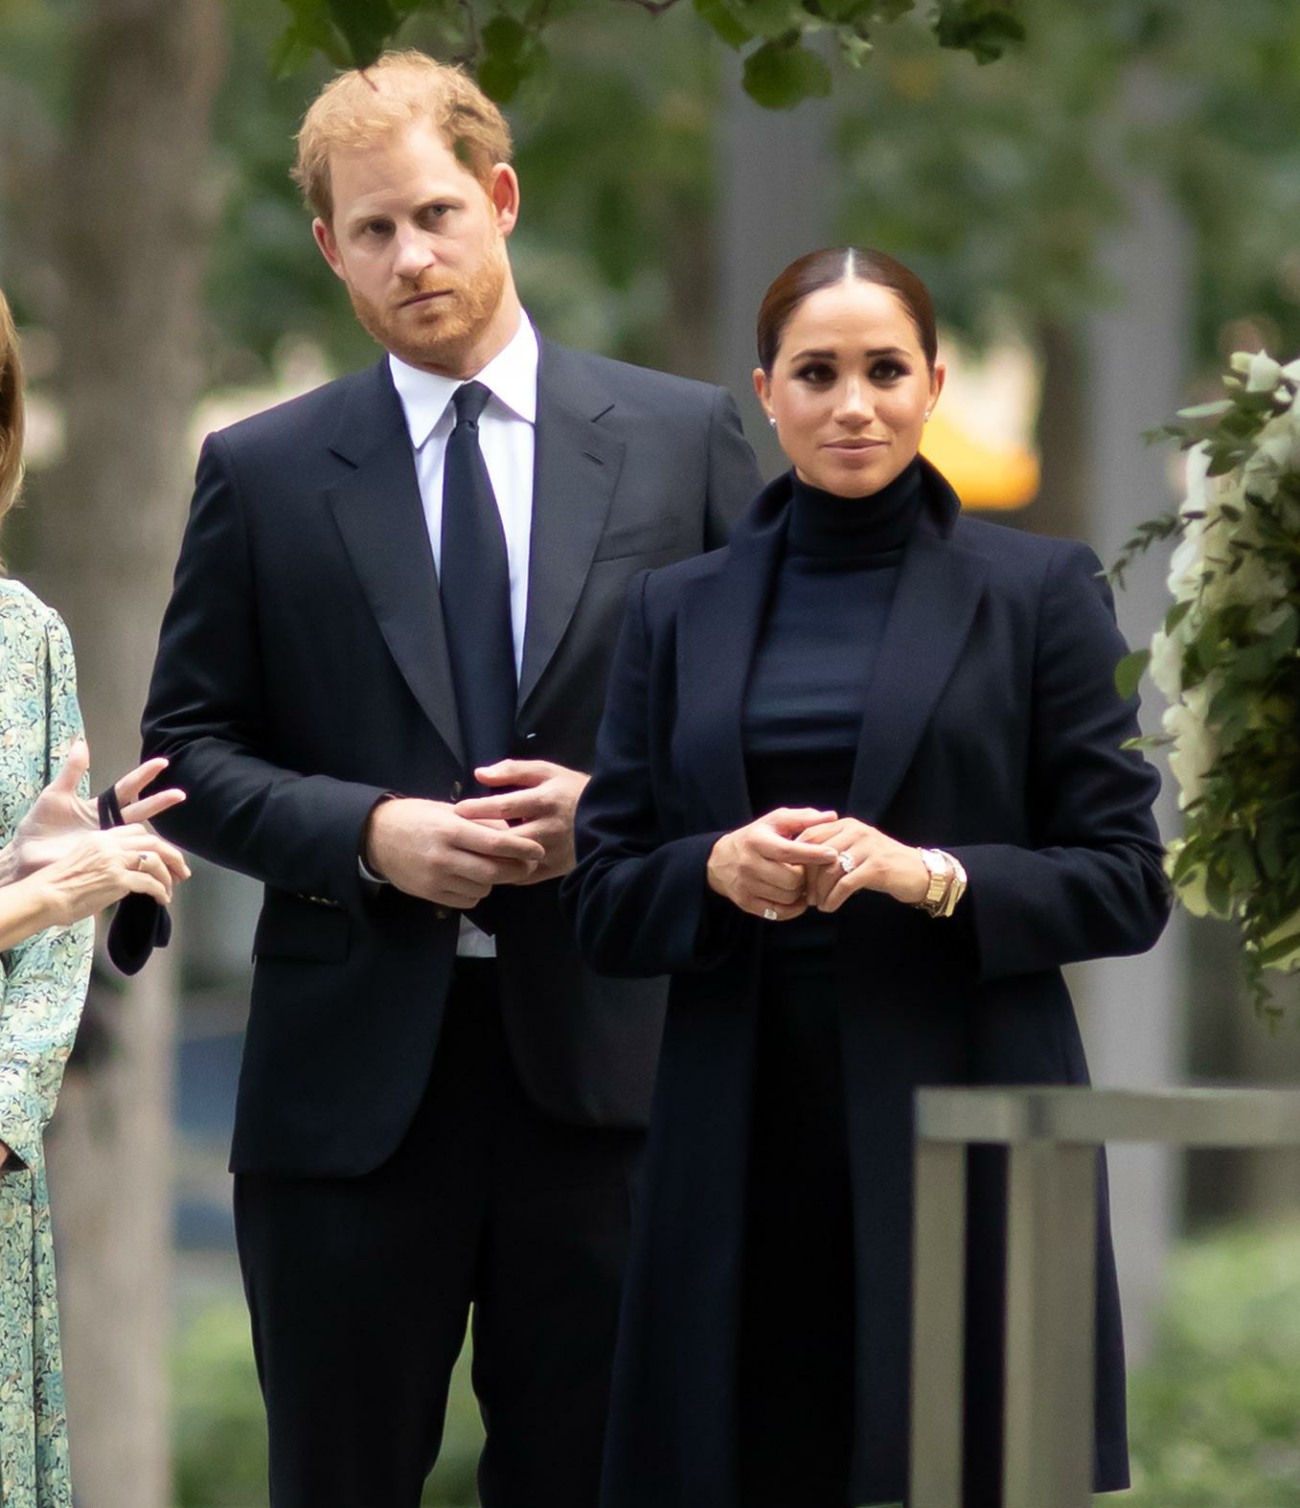 Prince Harry and Meghan Markle Visit the World Trade Center